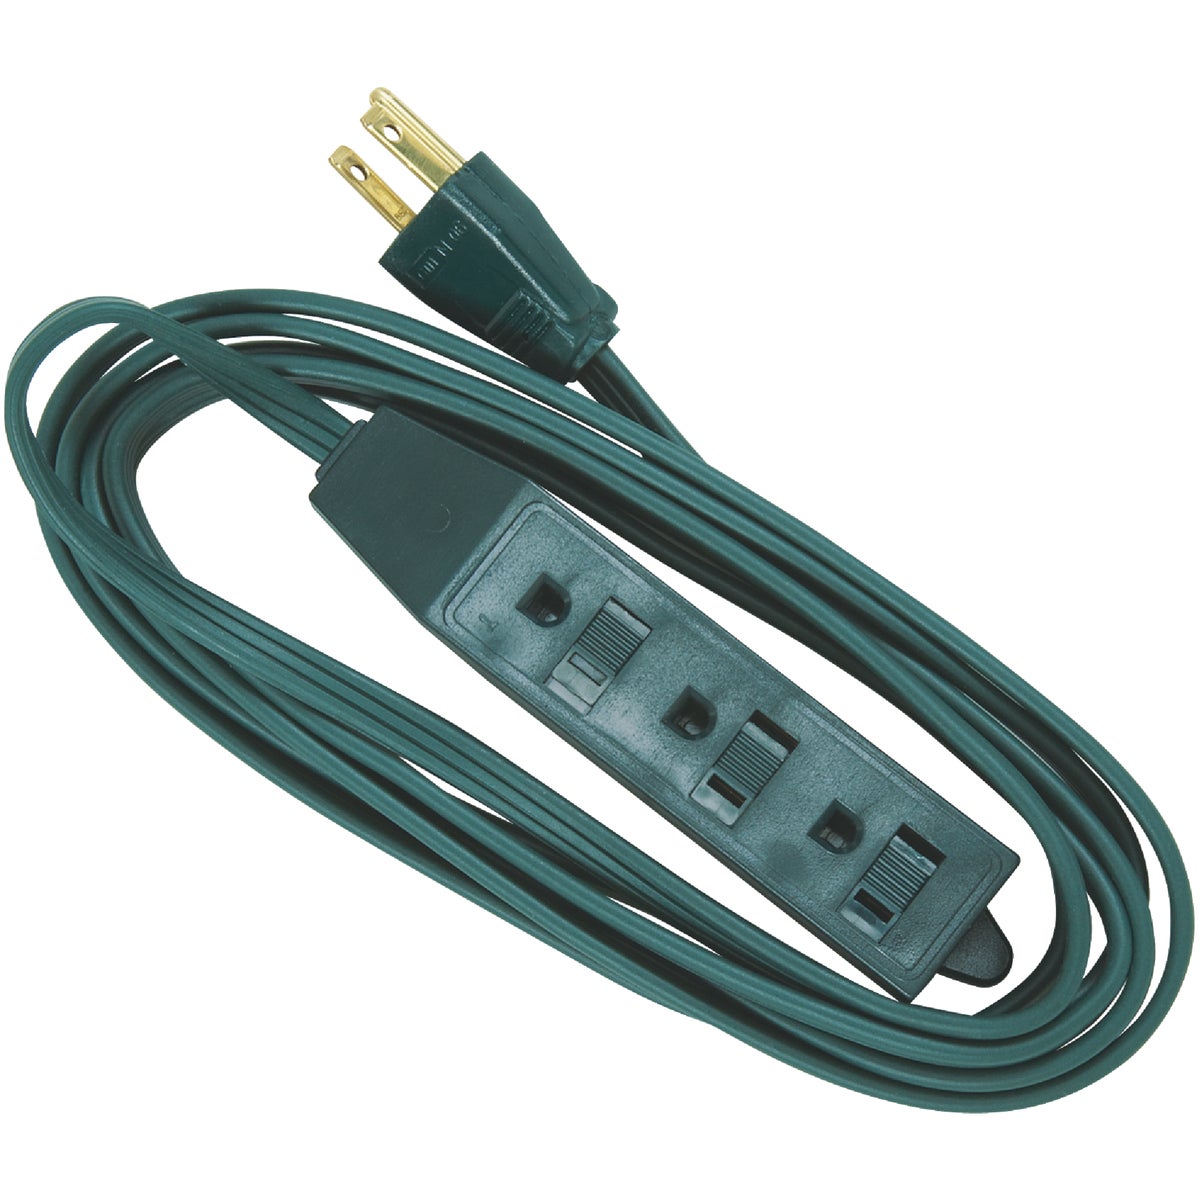 Item 557927, 16-gauge/3-conductor, SPT-2 vinyl, interior household extension cord with 3